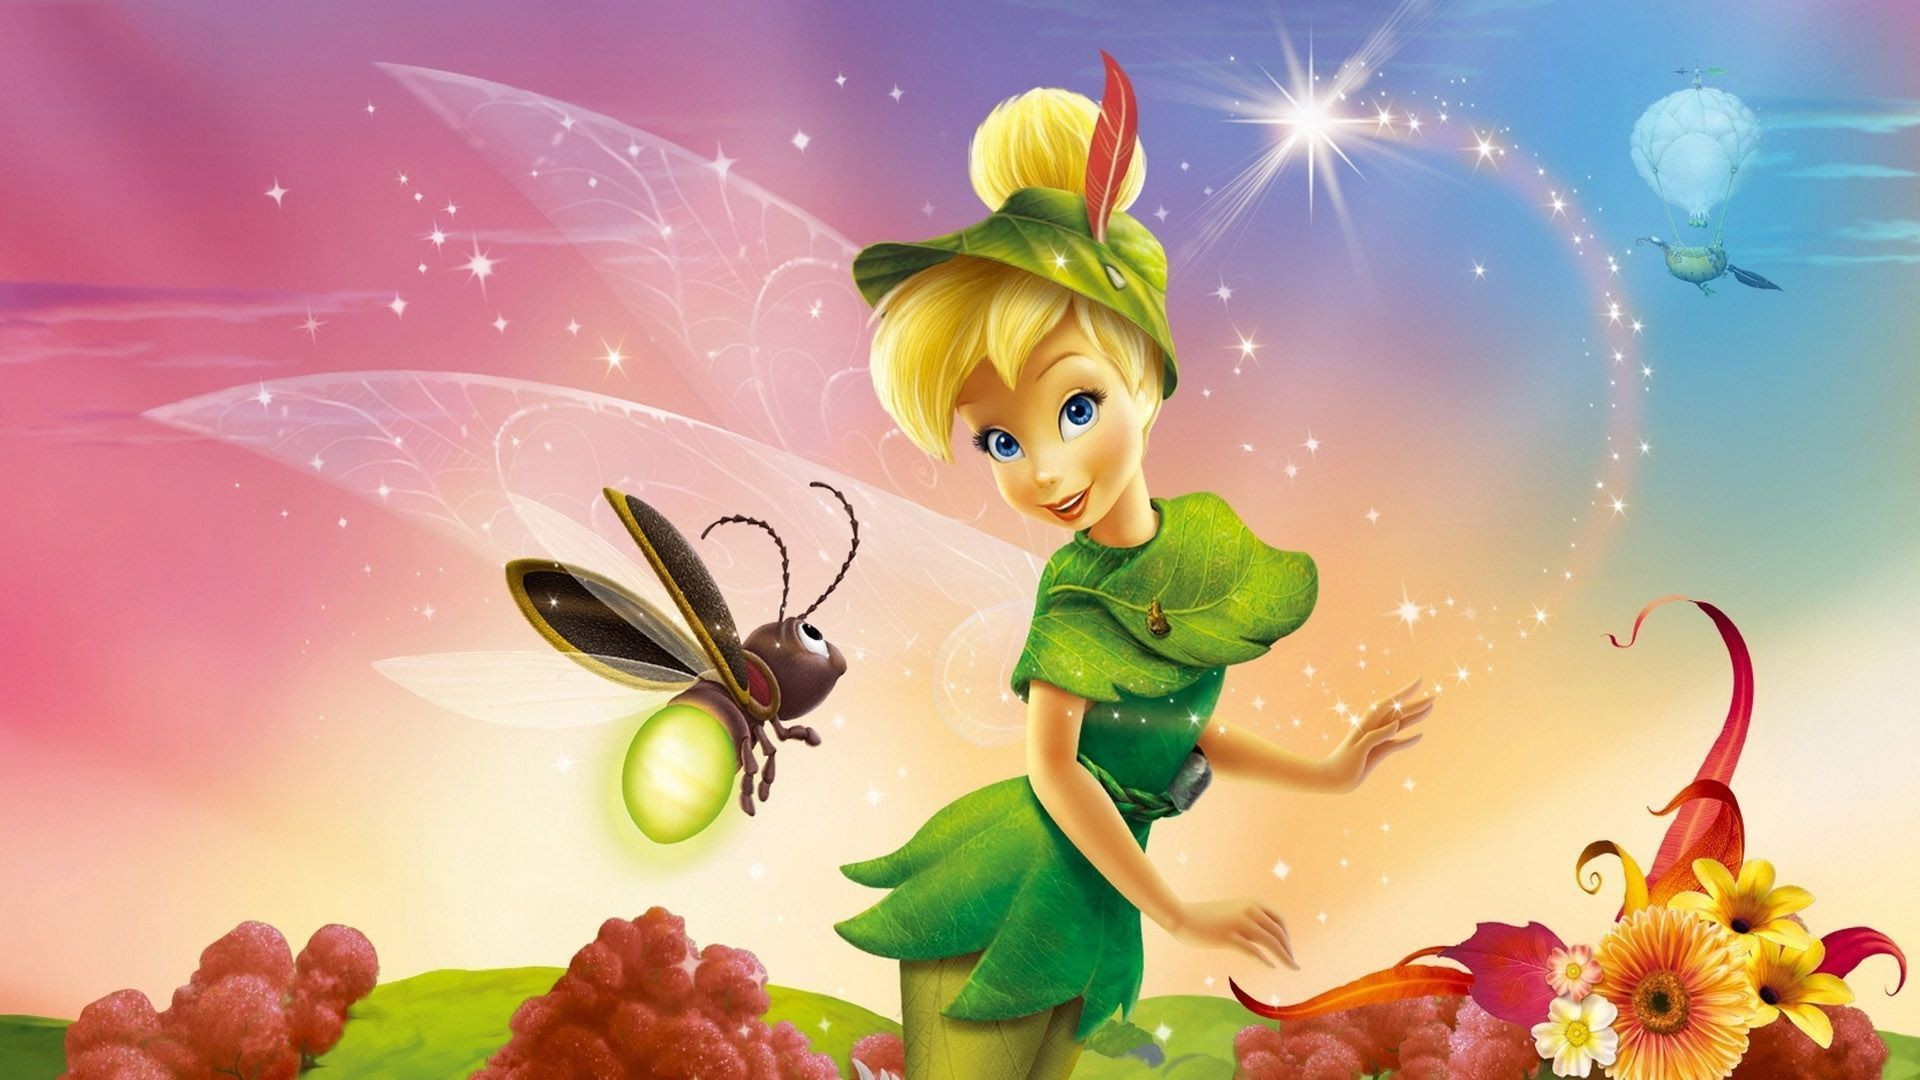 1920x1080 ... Tinkerbell Hd Wallpapers Free Download. Download